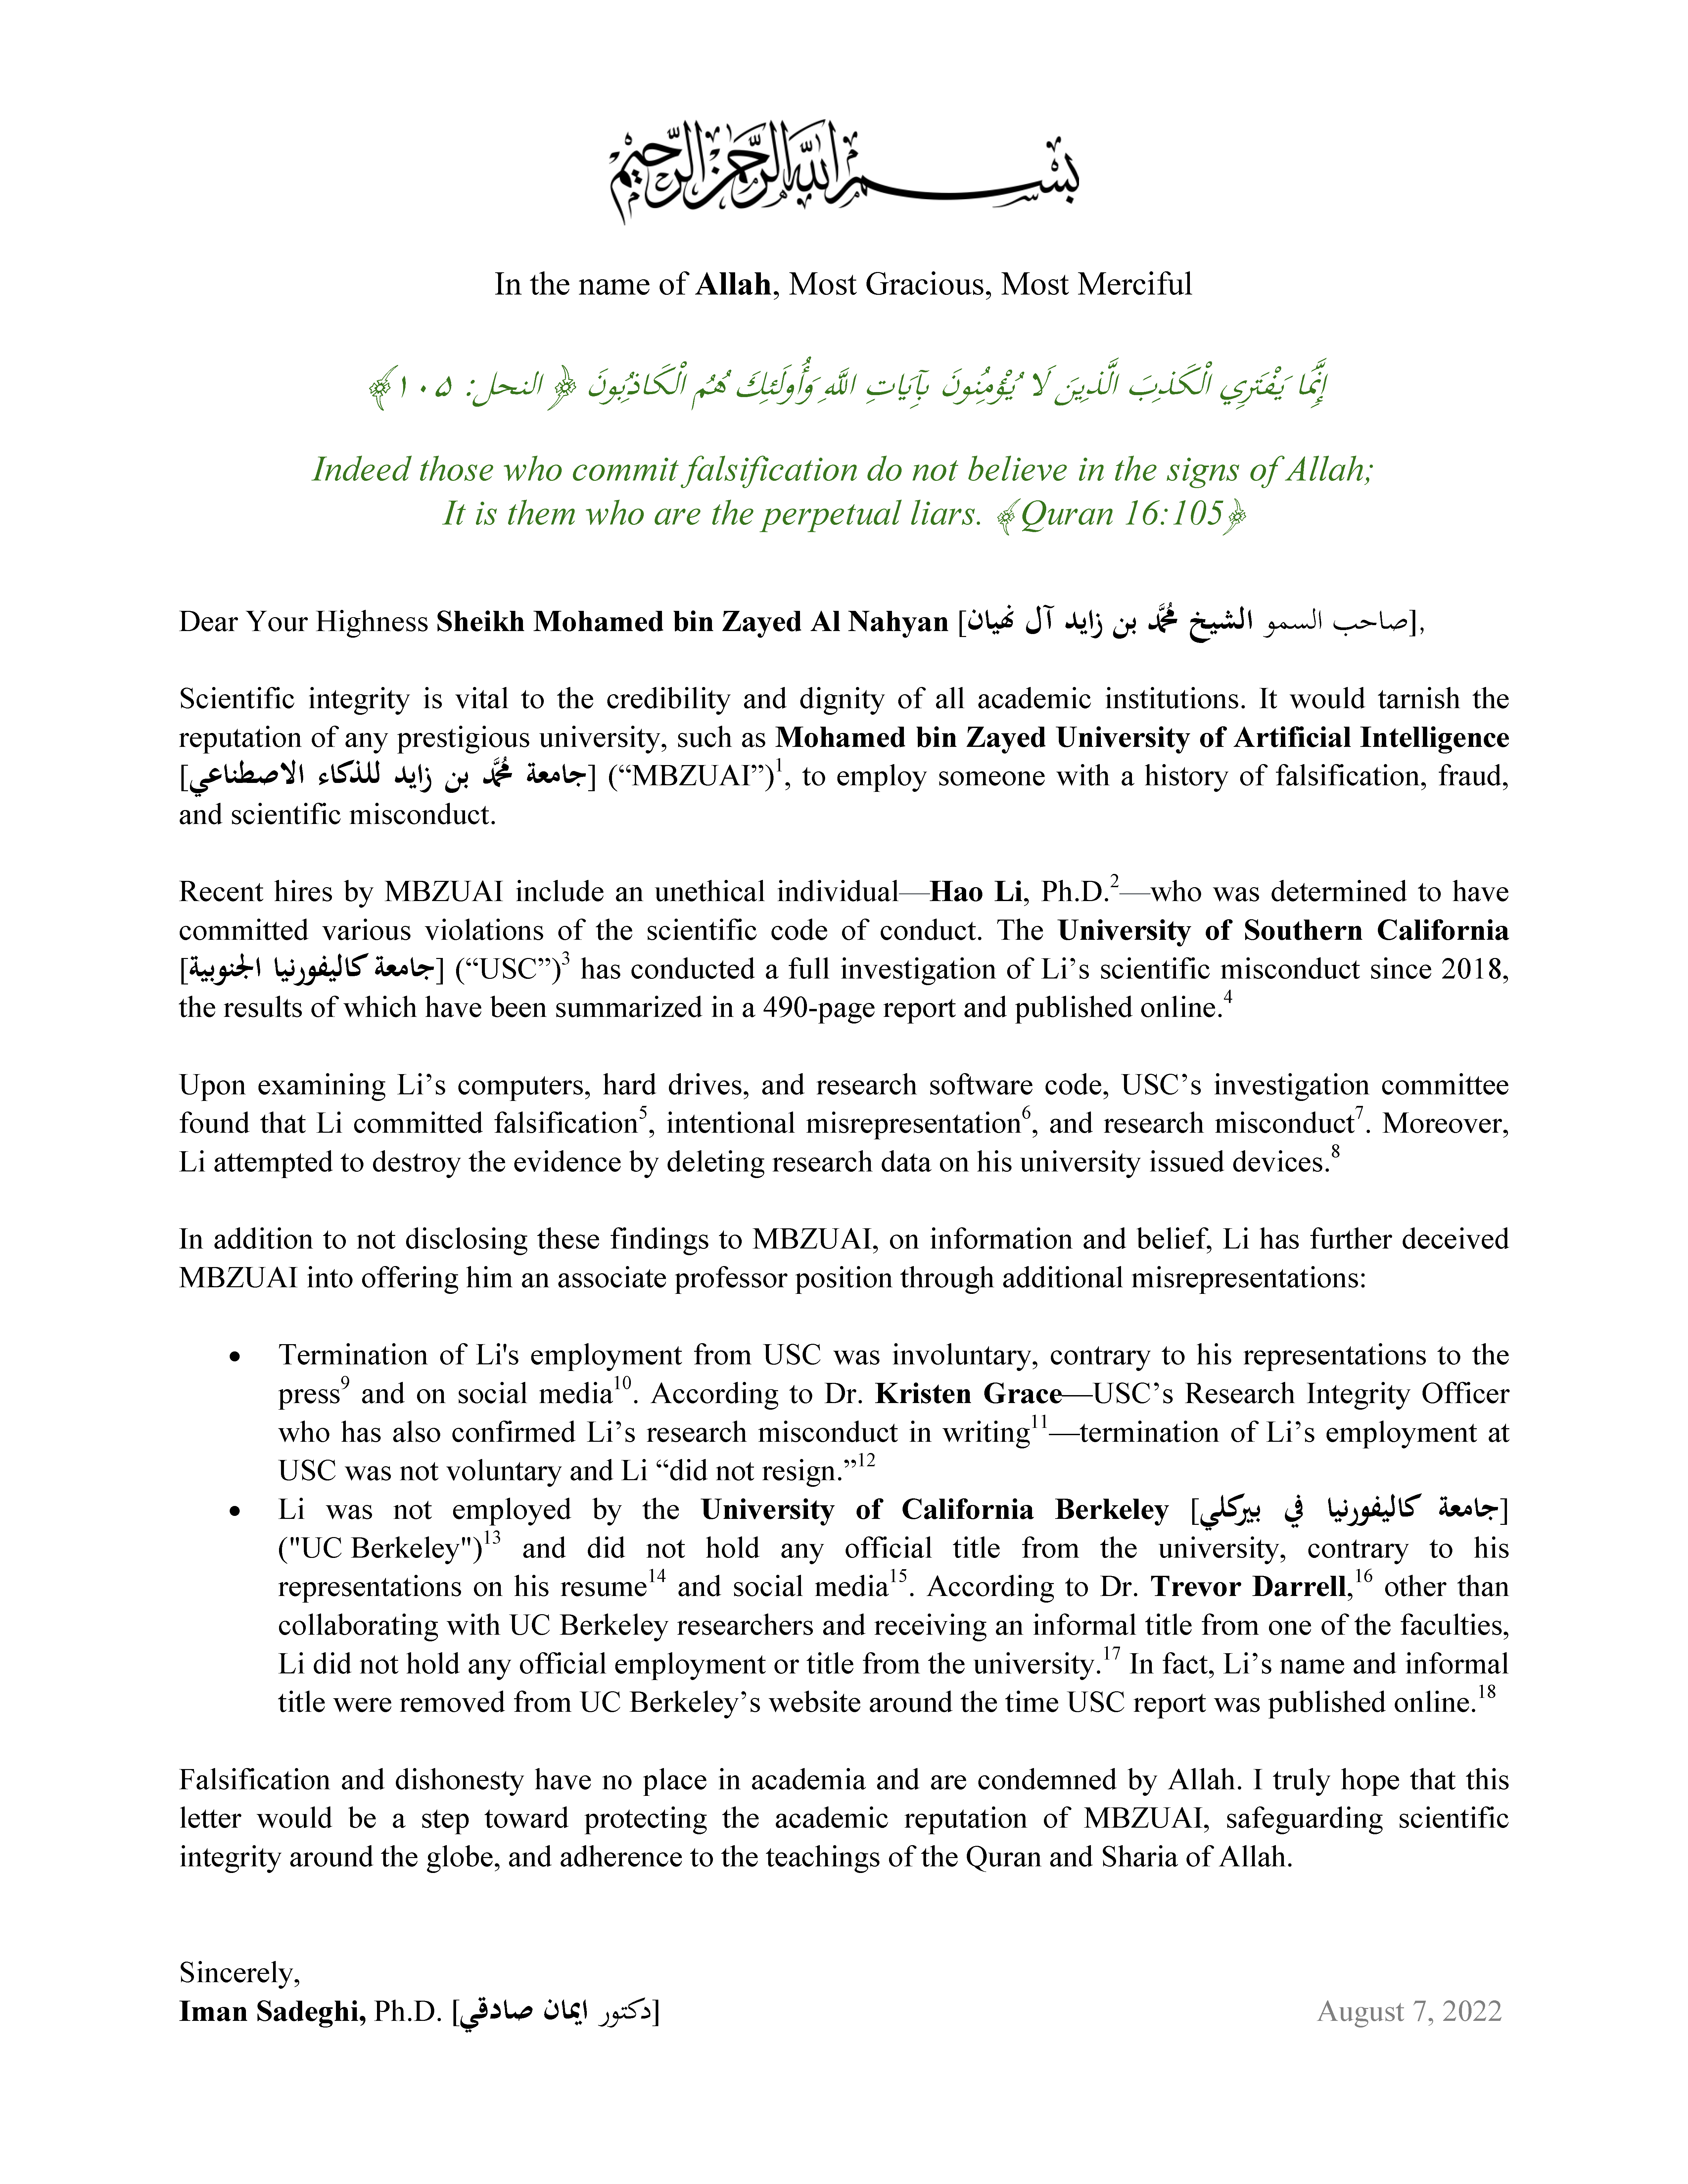 Letter to His Highness Sheikh Mohamed bin Zayed re Scientific Integrity at MBZUAI Page 1